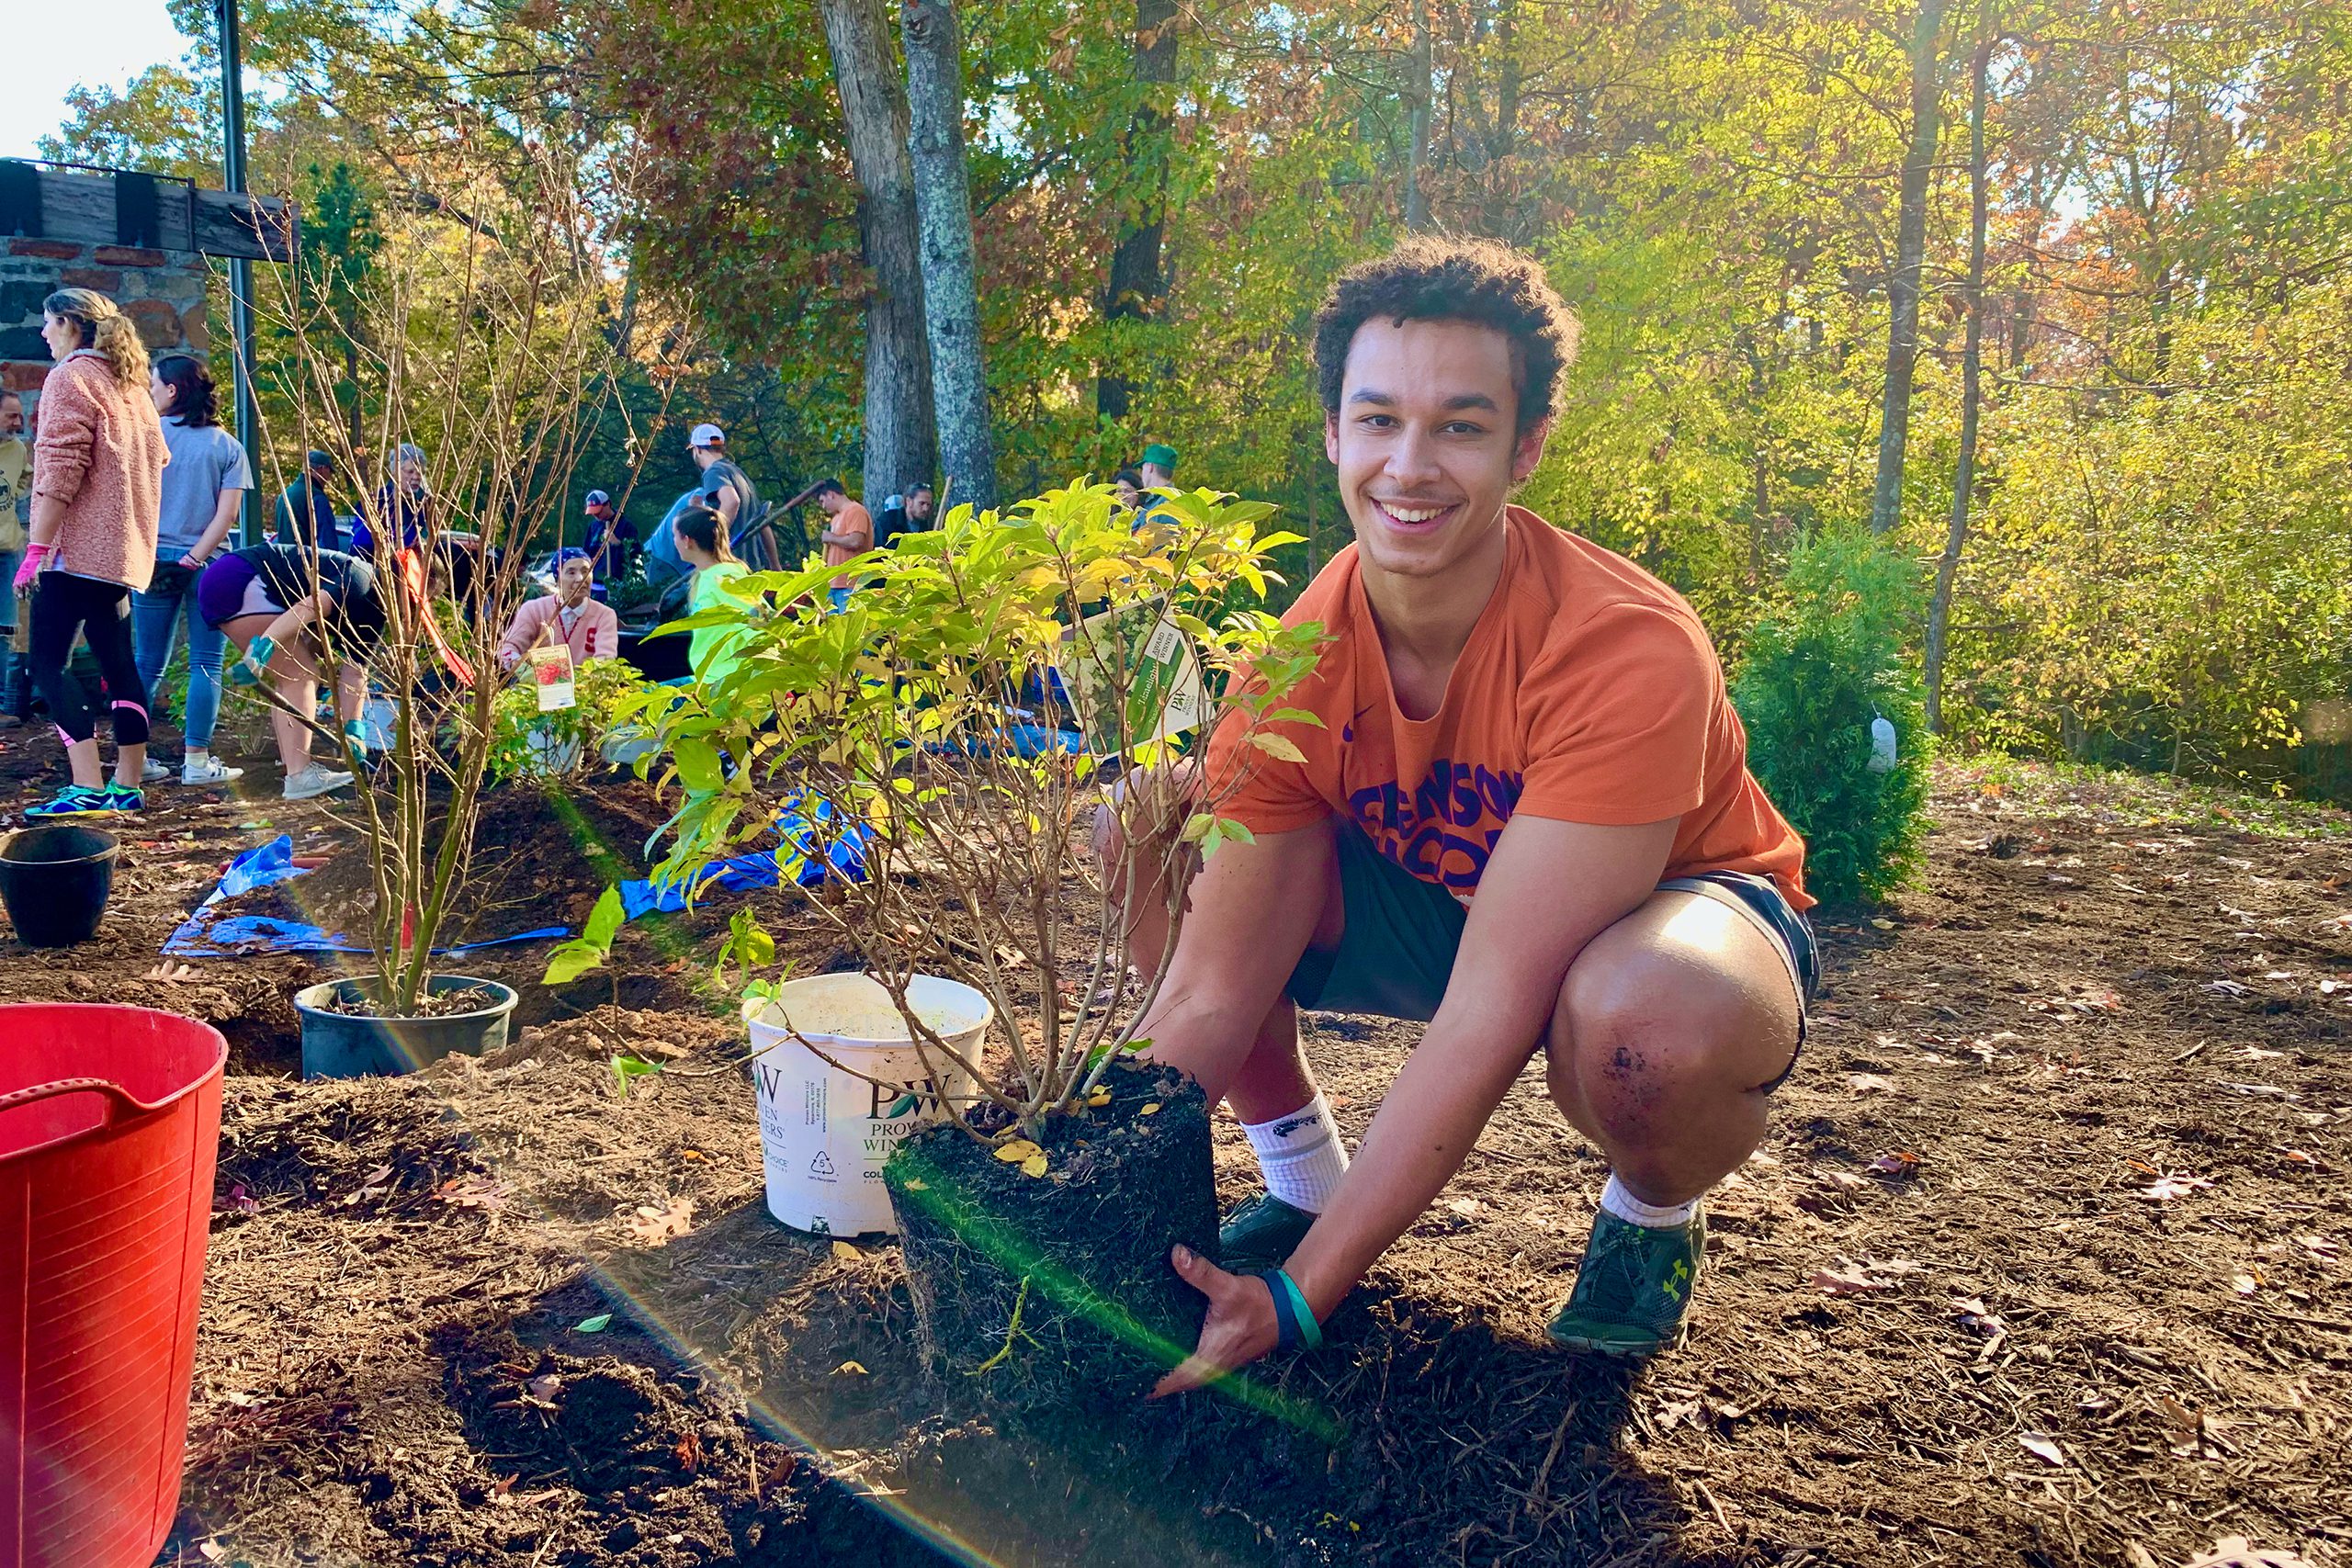 A young male, a student of the new STEM designated landscape architecture student poses in front of the camera with a smile on his face. He is squatting down and holding a small tree in his hands that it looks like he is getting ready to plant.